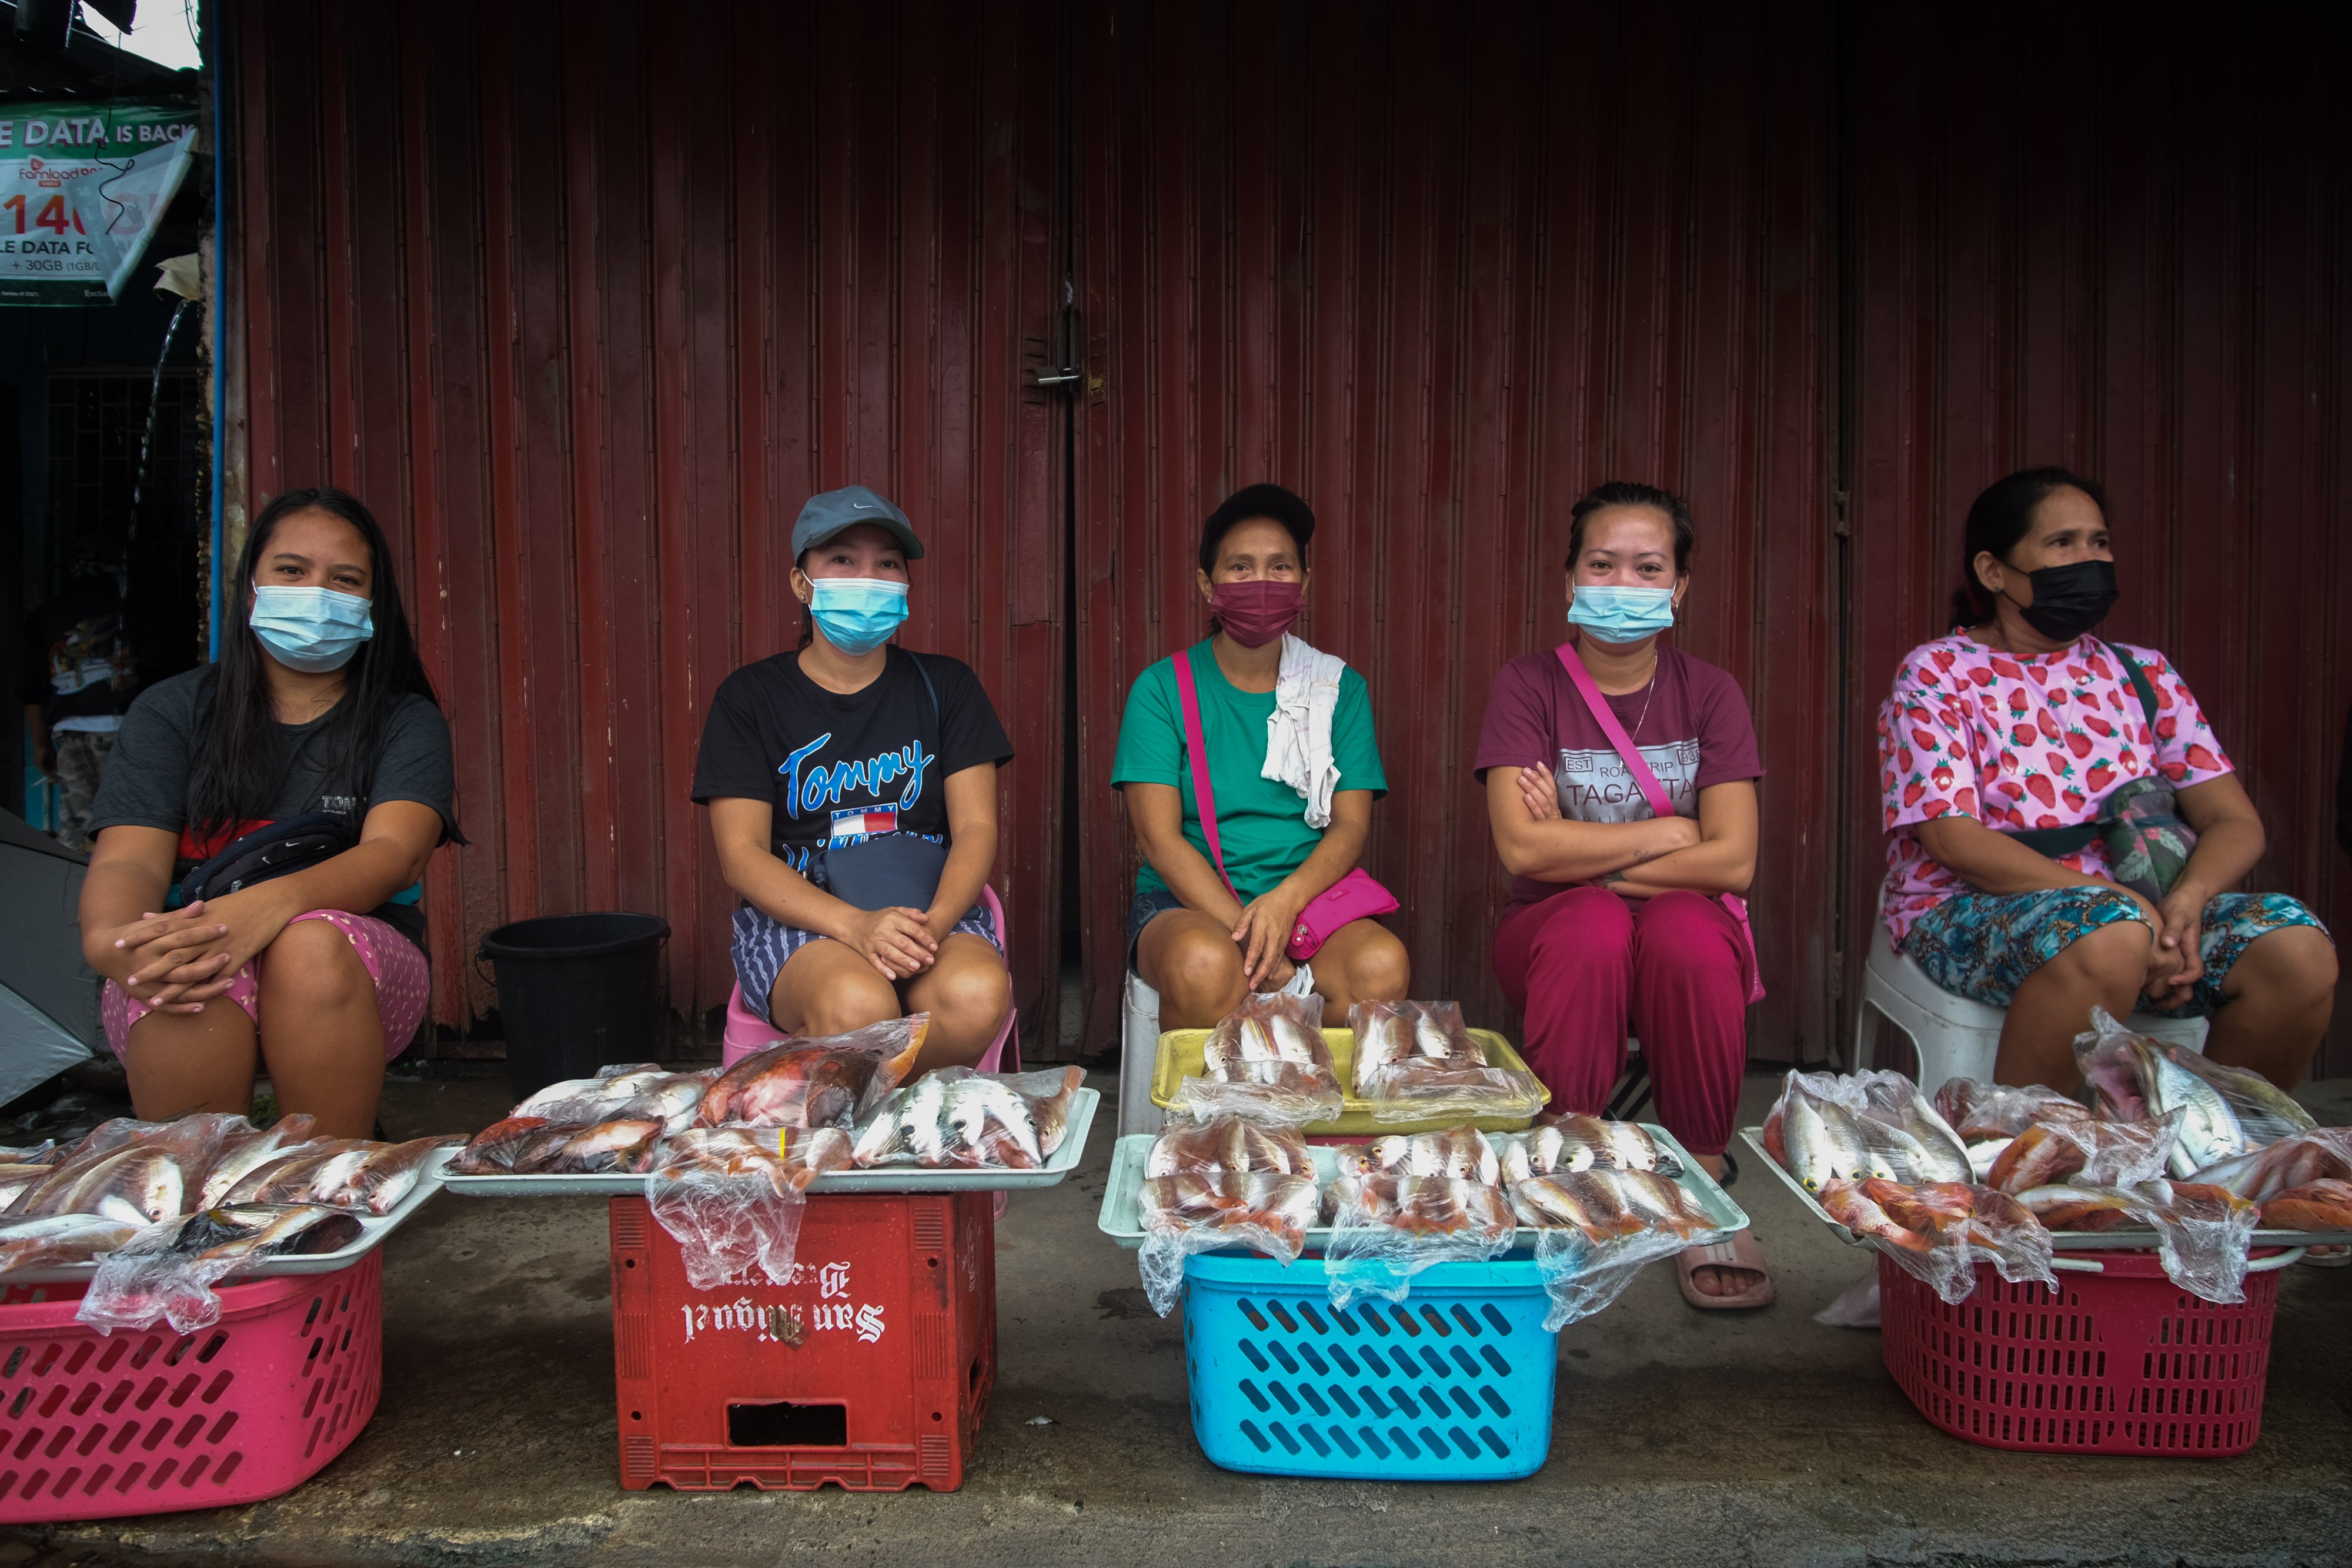 five masked women sit on small stools at a market with buckets and trays of fish lined up in front of them, waiting to sell